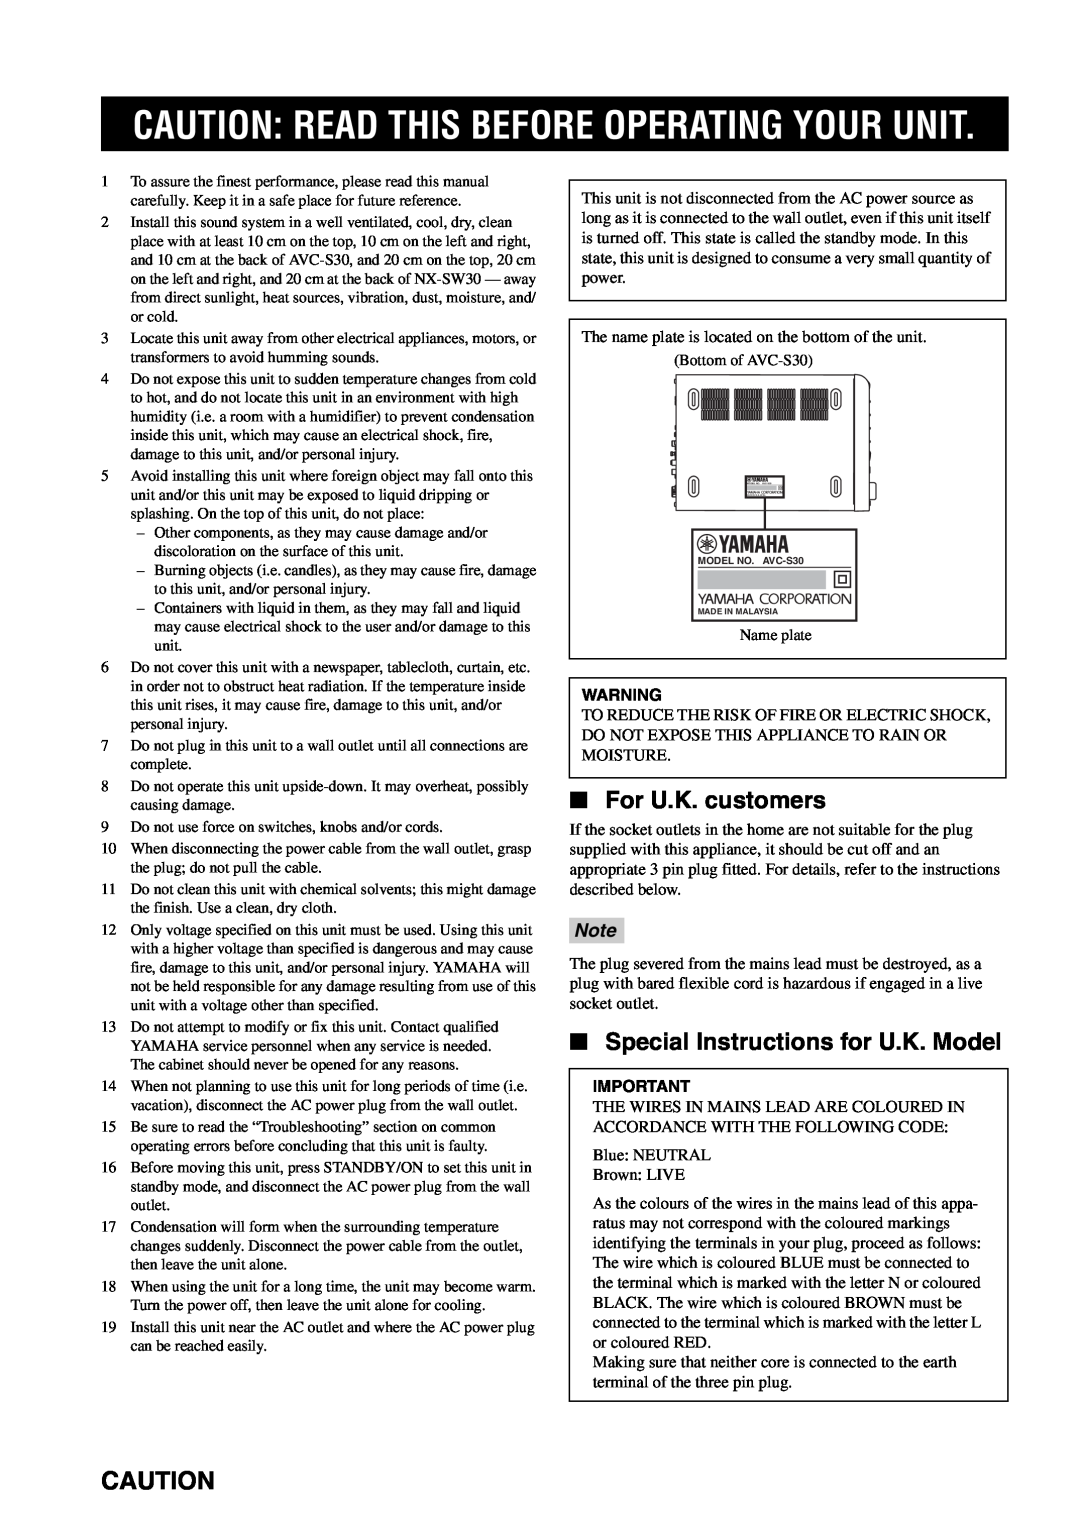 Yamaha AVX-S30 Caution: Read This Before Operating Your Unit, For U.K. customers, Special Instructions for U.K. Model 